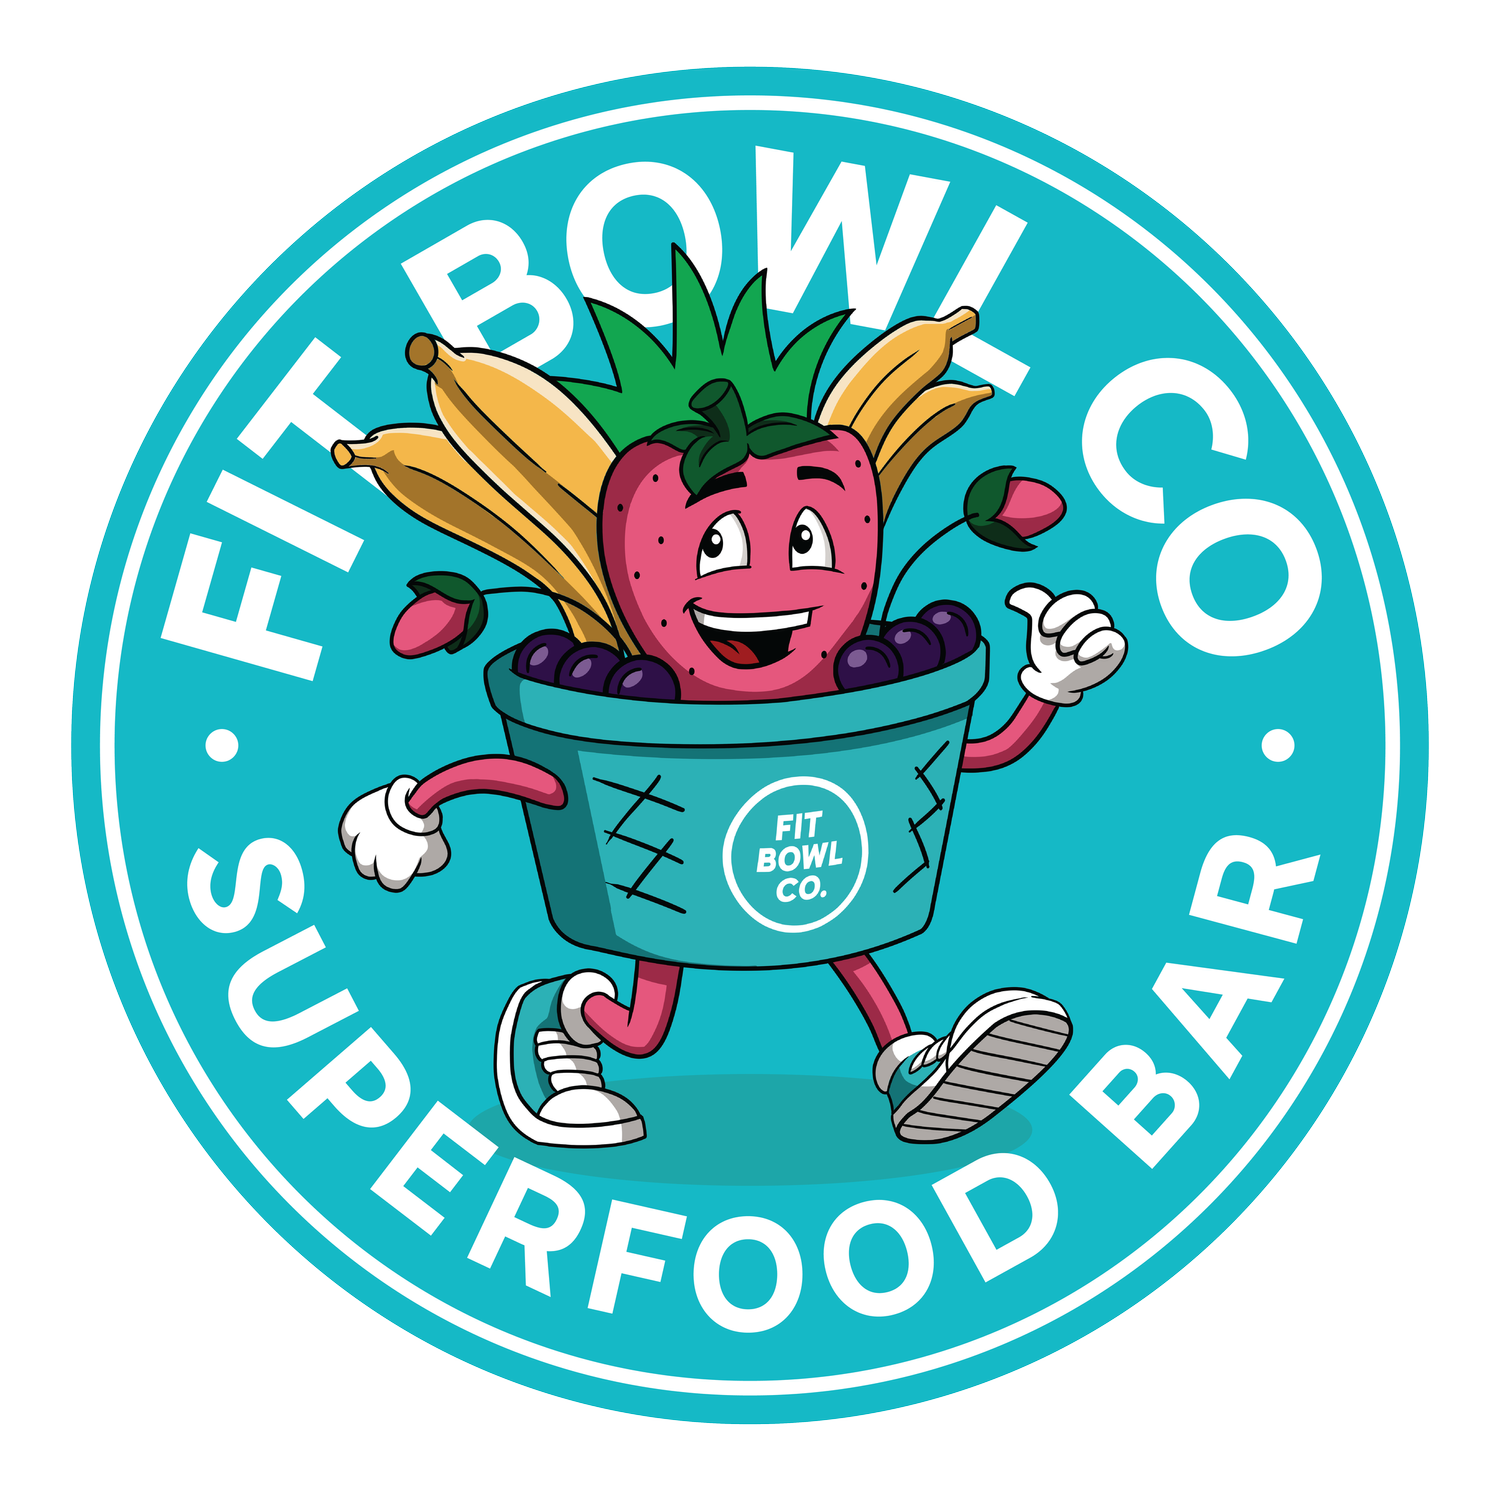 Fit Bowl Co. | Tampa